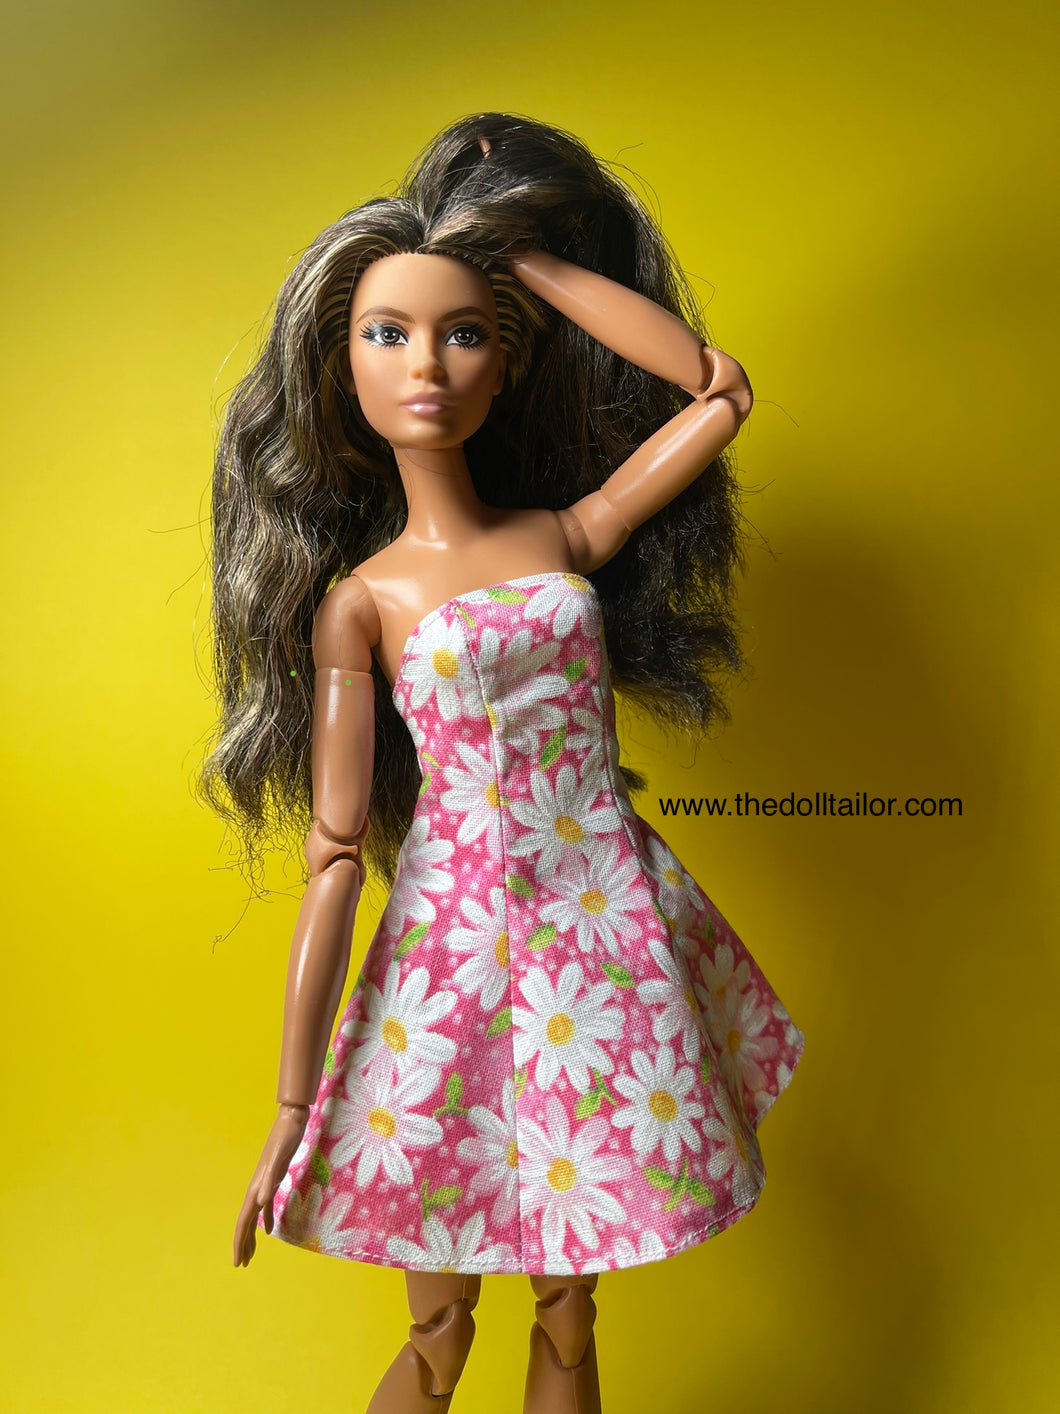 Floral dress for fashion doll 1:6 scale doll dress